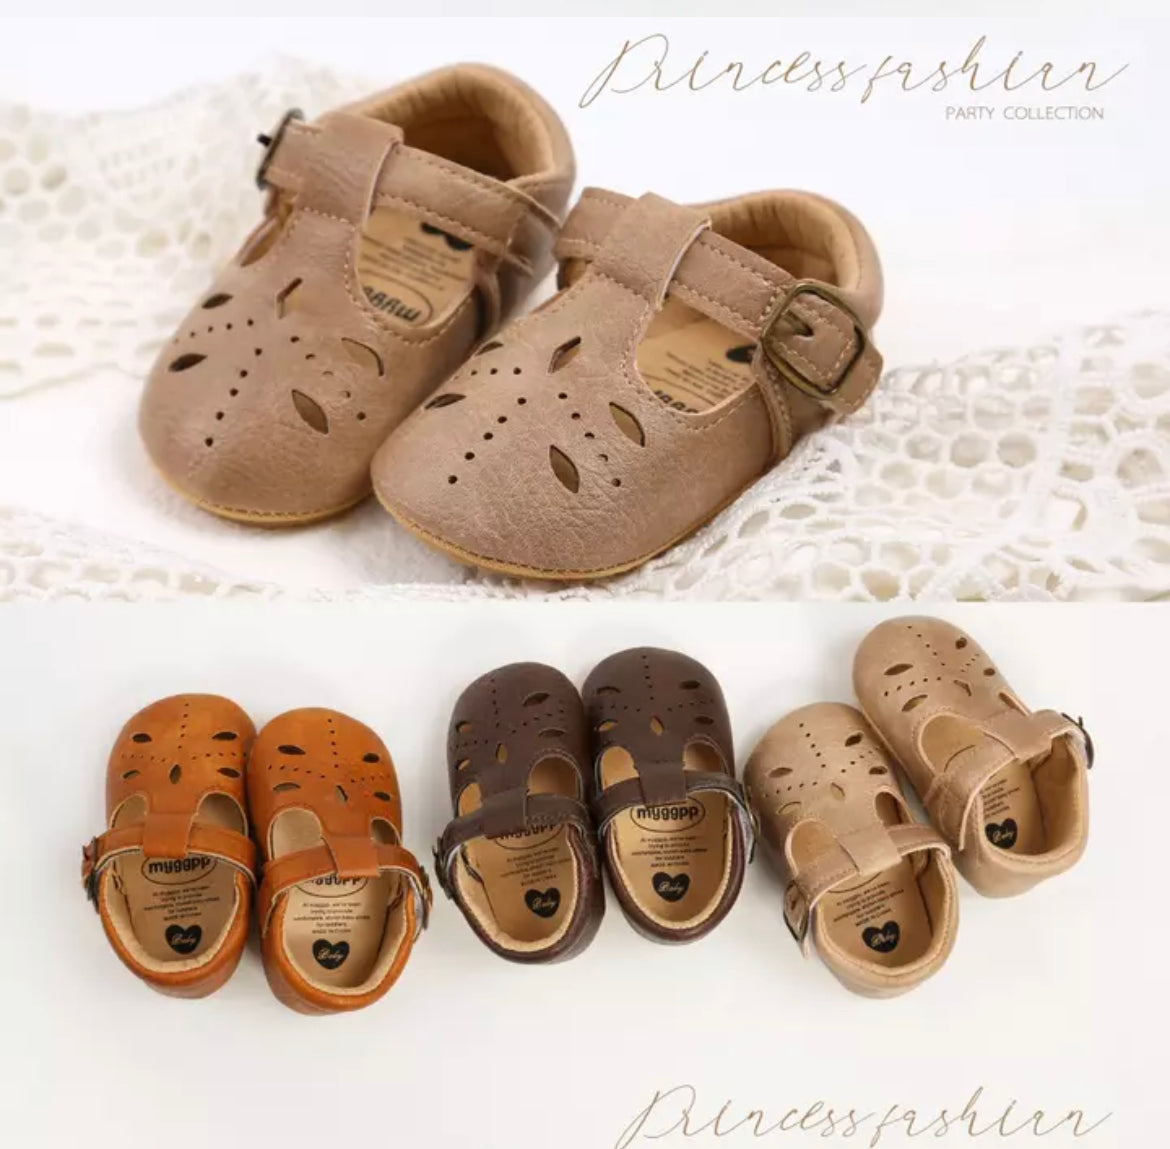 JESSICA T-BAR BABY SHOES - BEIGE.